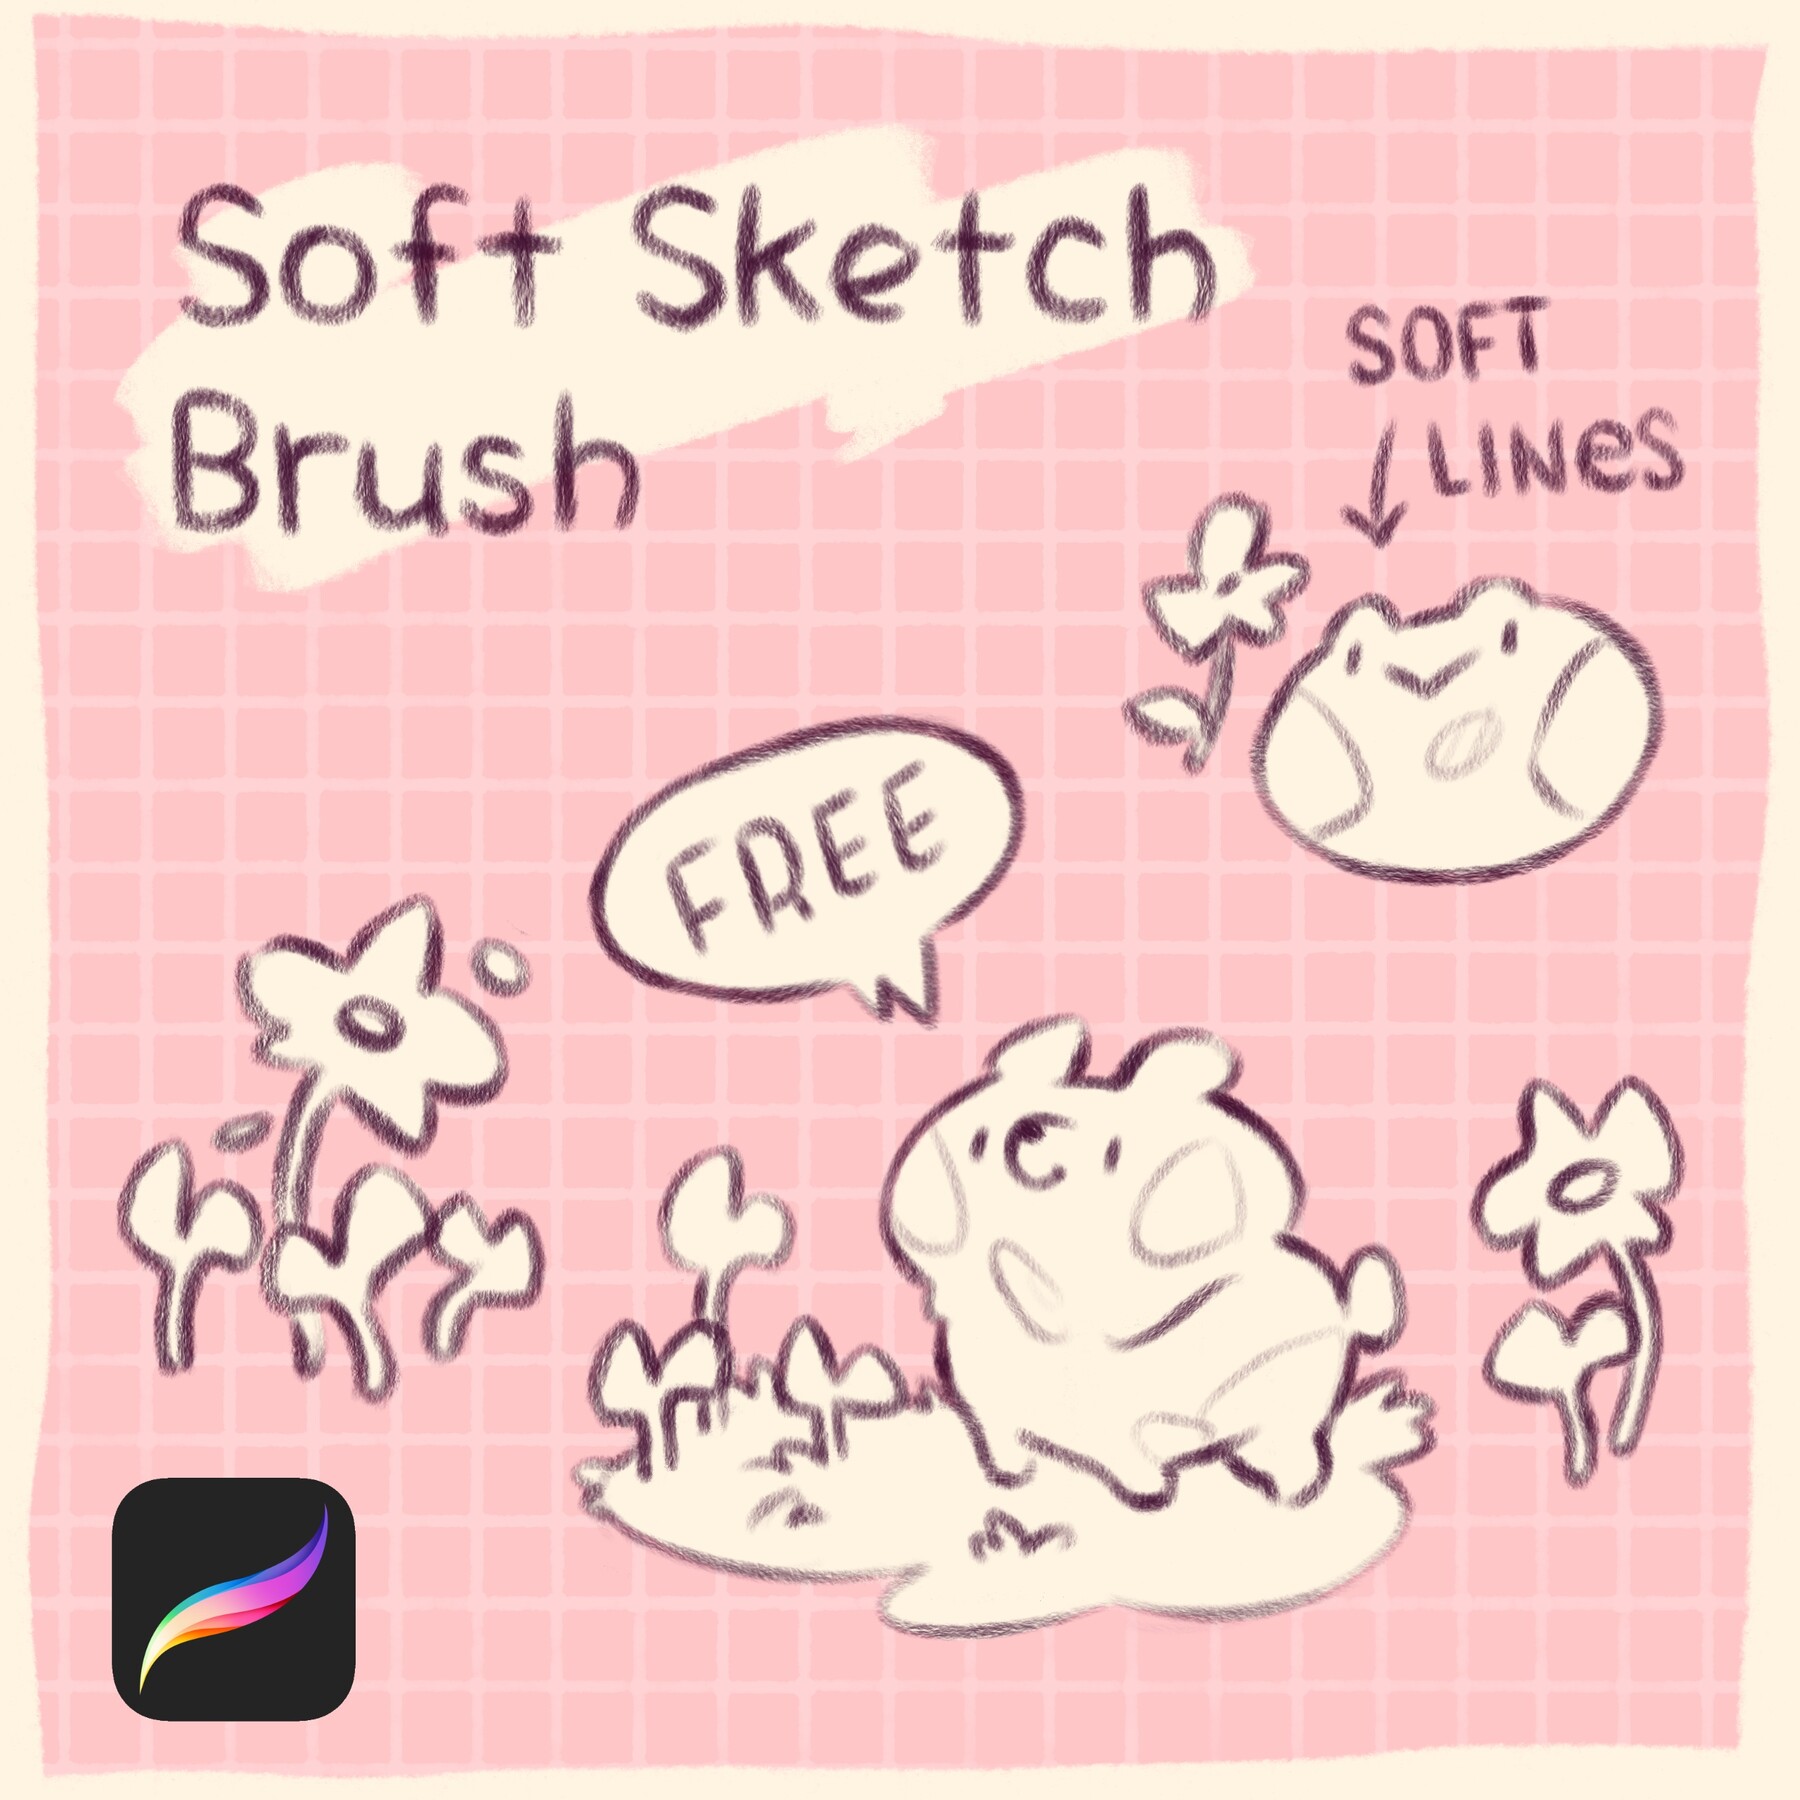 6 free sketch brushes  Free Brushes for Procreate